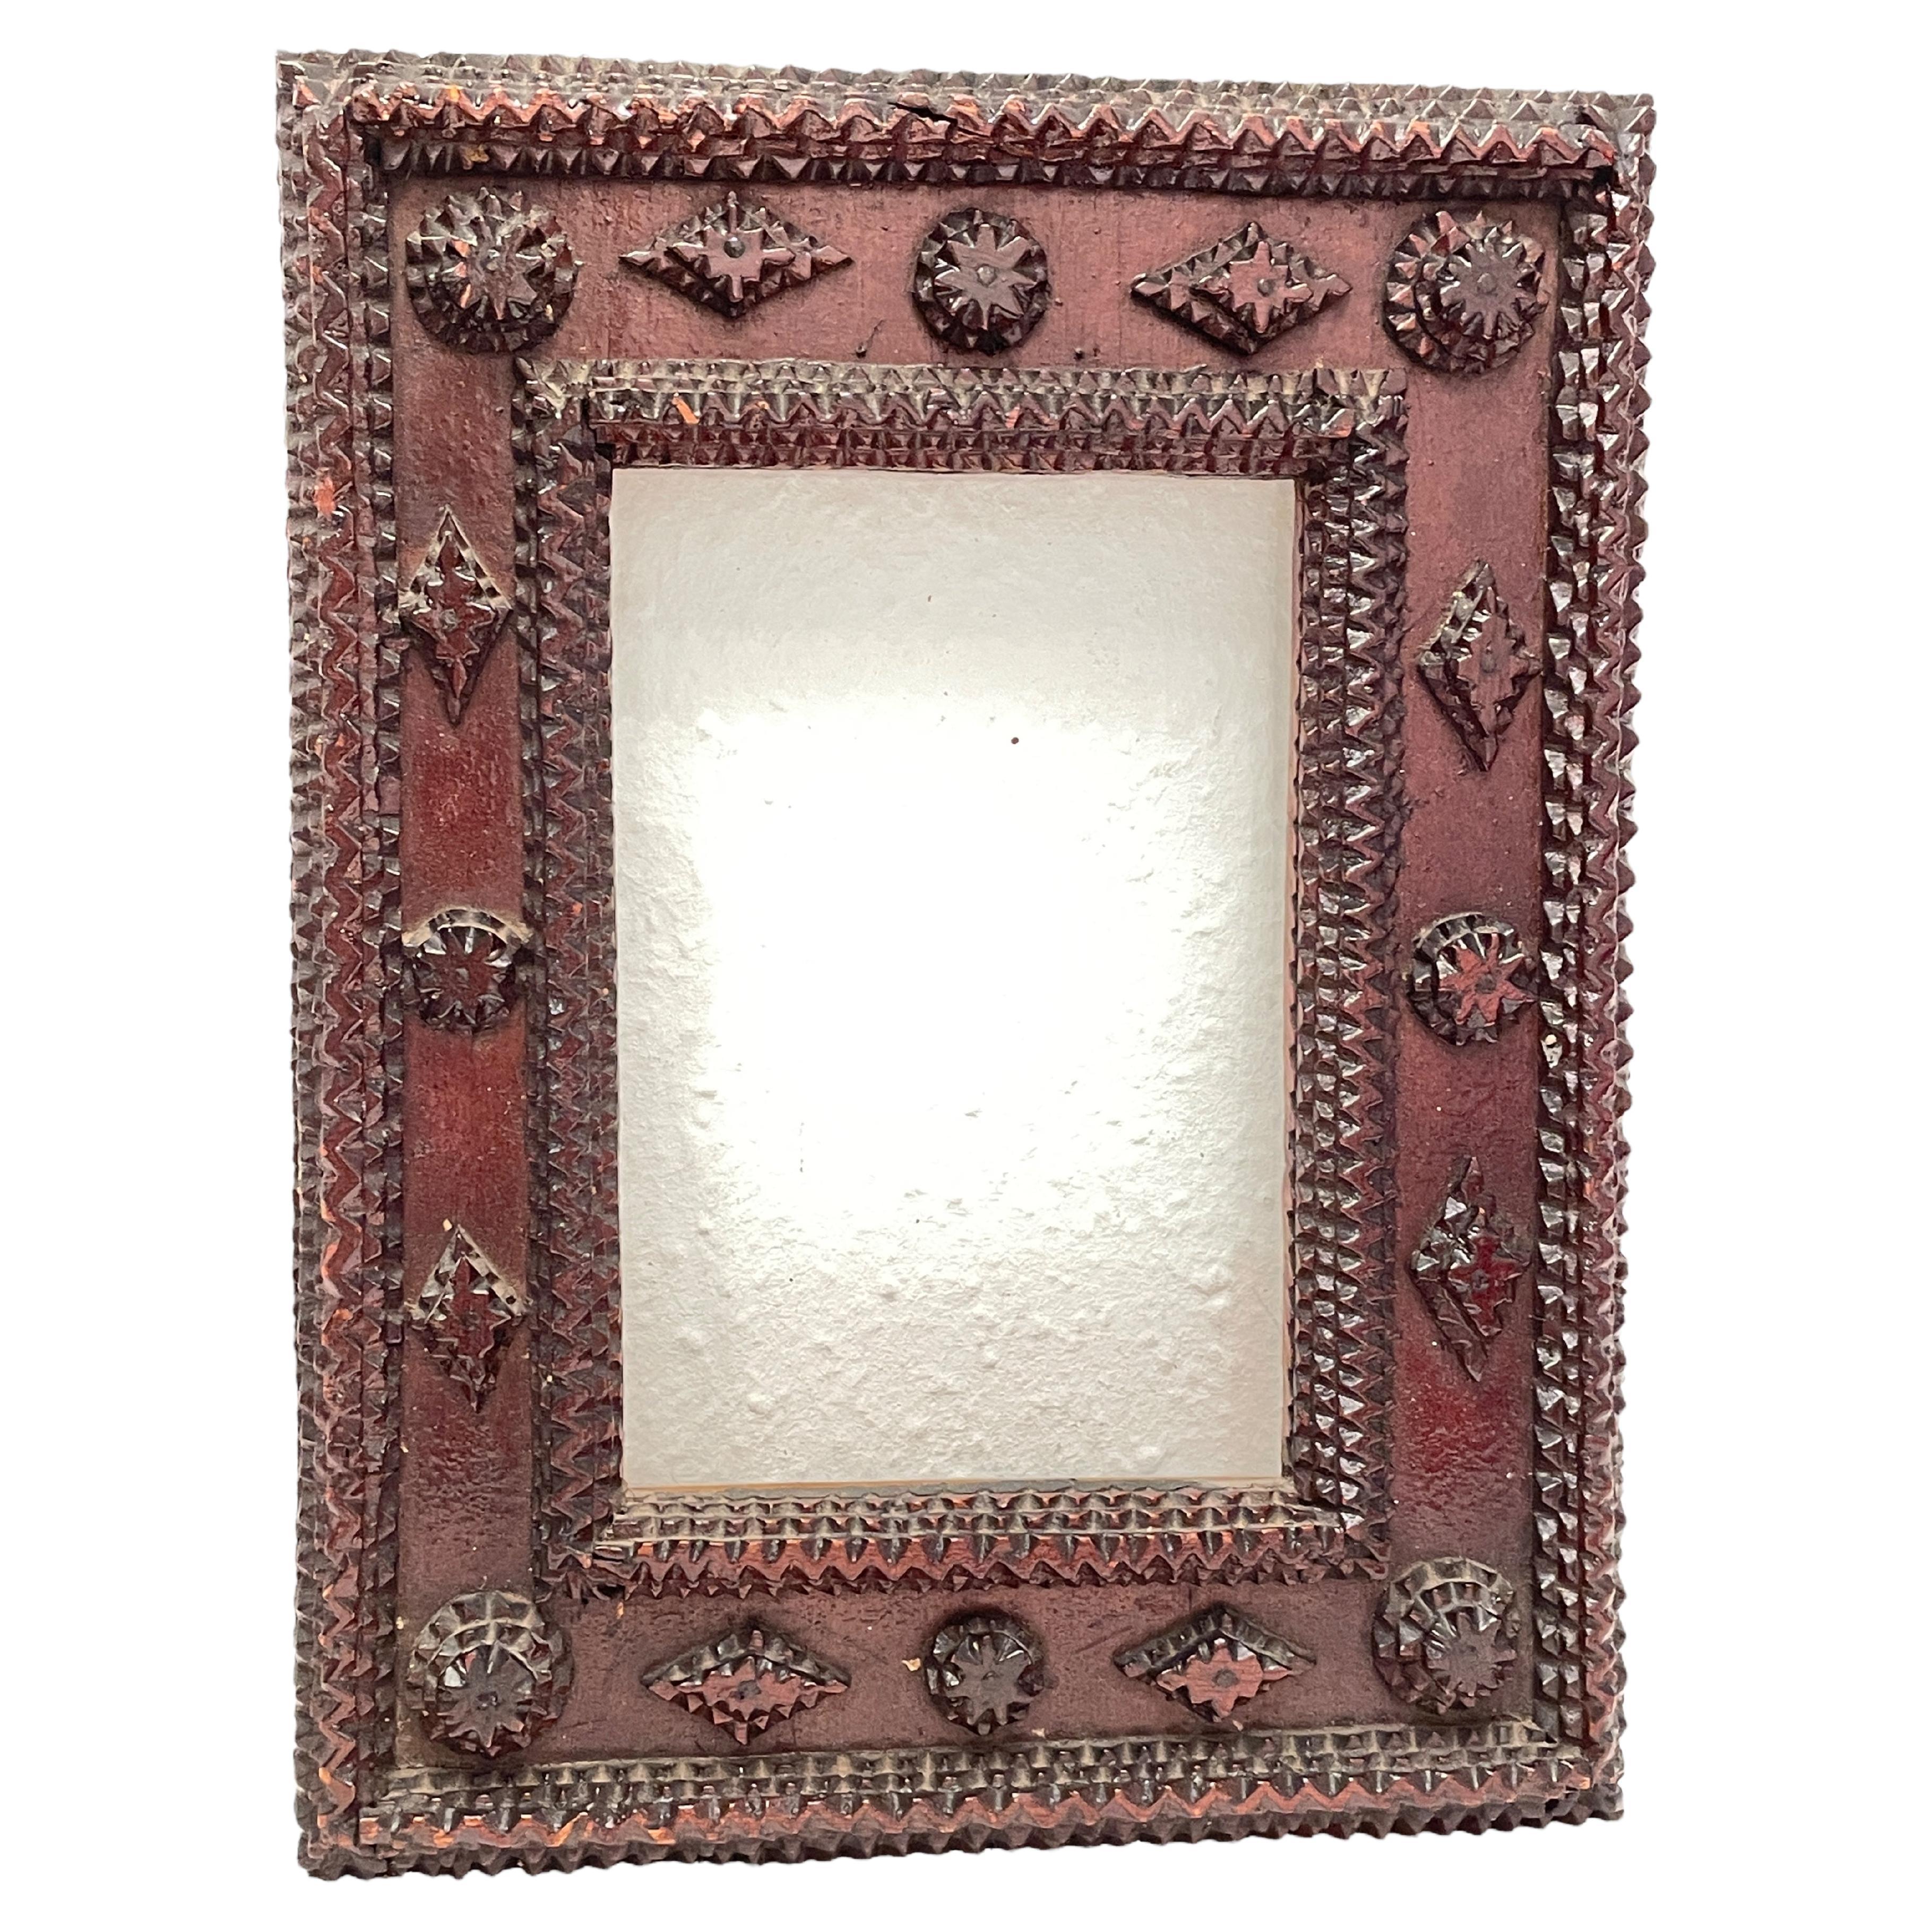 Tramp Art Picture Frame Late 19th Century Antique, German